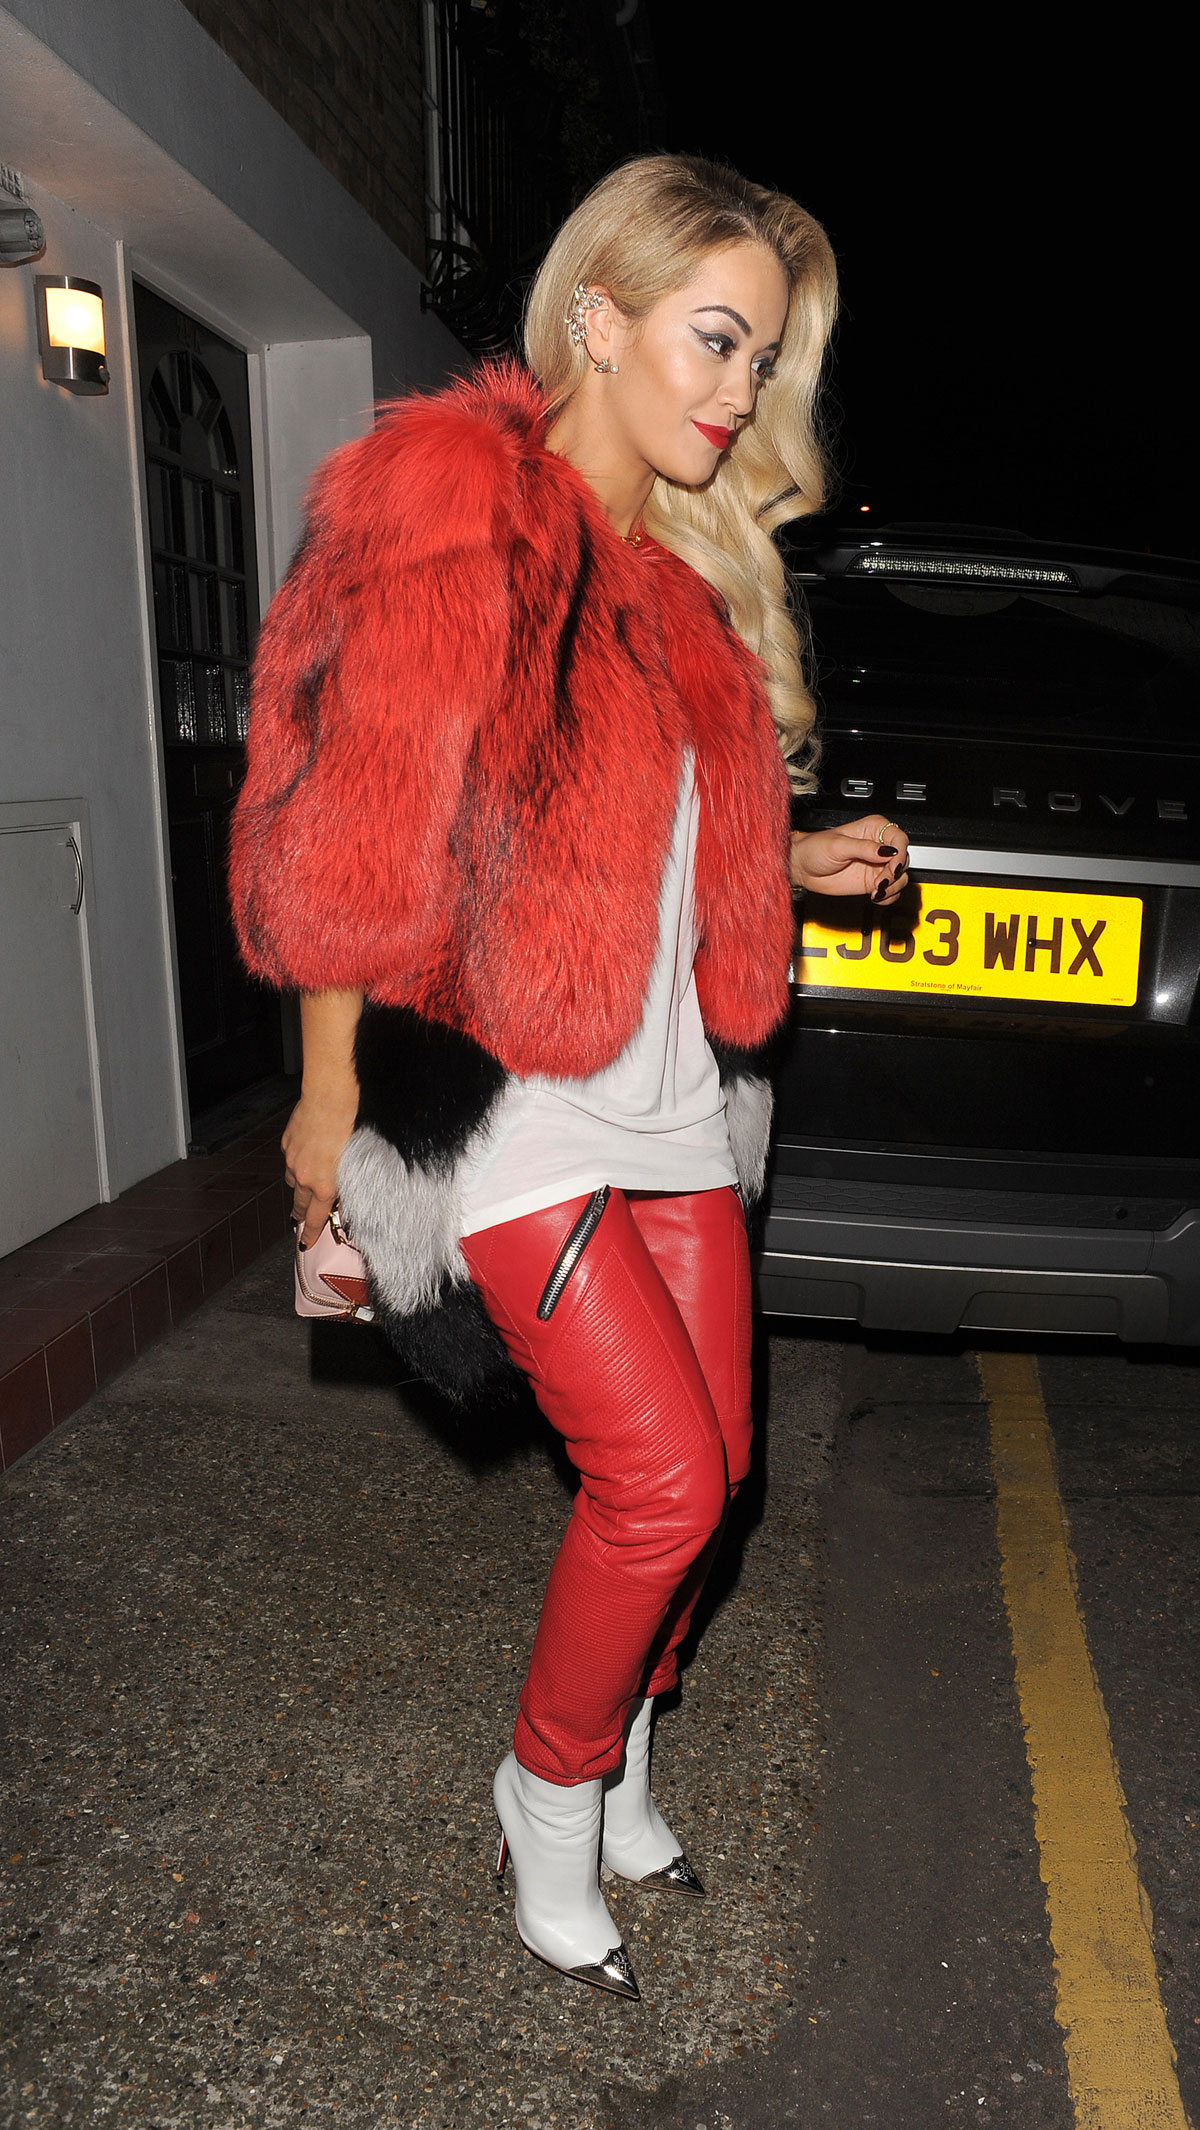 Rita Ora heads out to the Topshop party